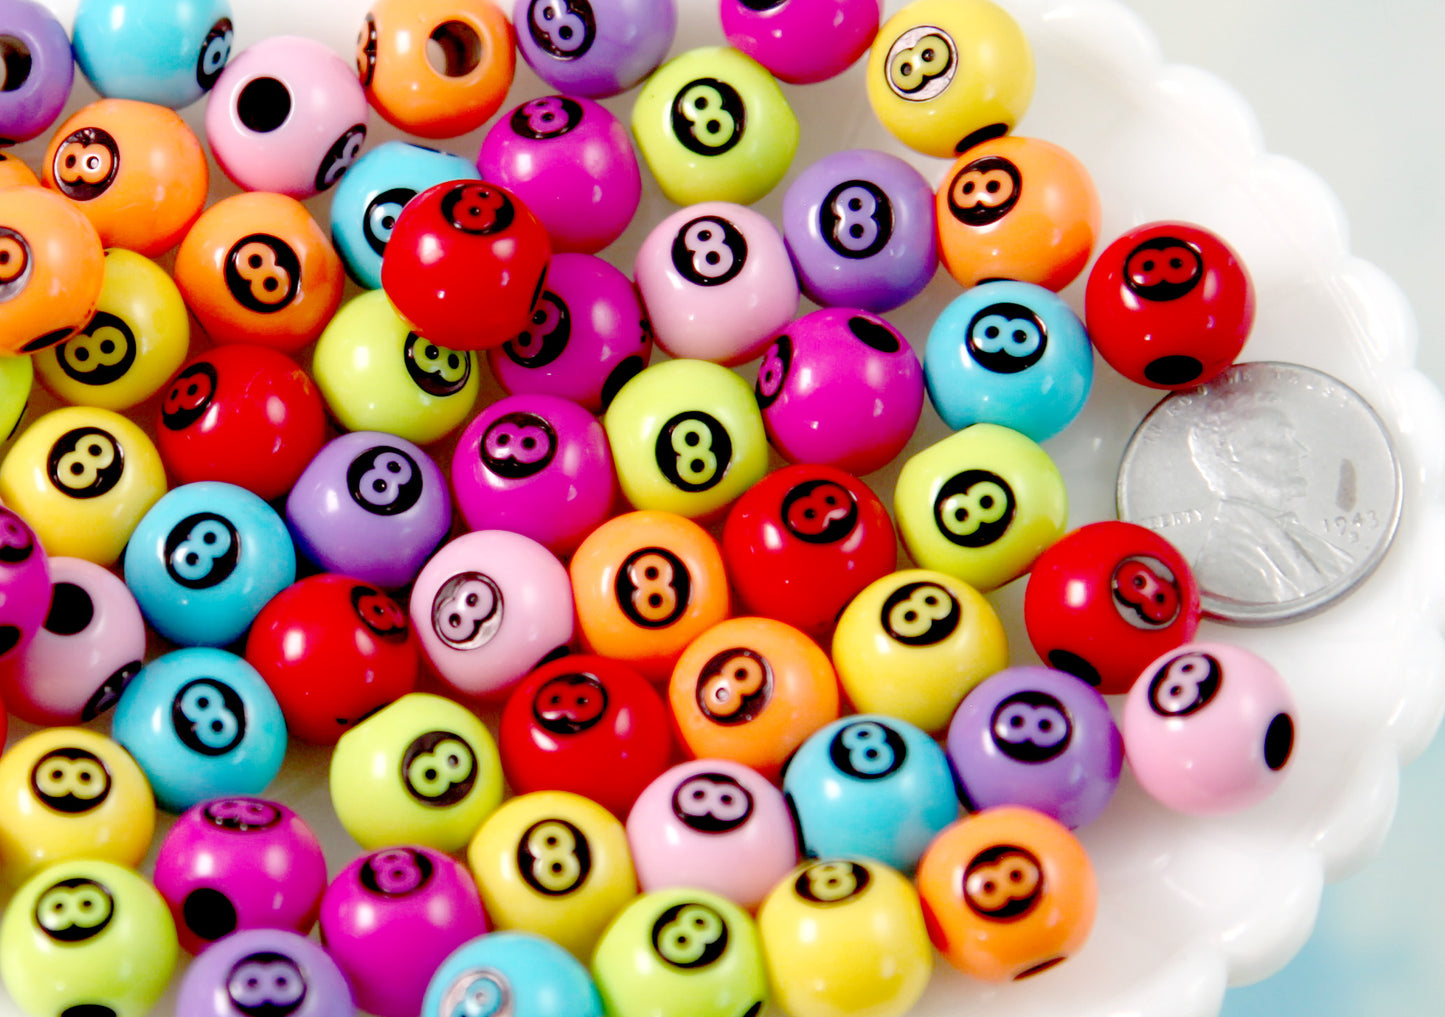 Colorful 8ball Beads - 10mm 8-ball Mixed Color with Black Round Billiard Eight Ball Pool Ball Acrylic or Resin Beads - 65 pc set